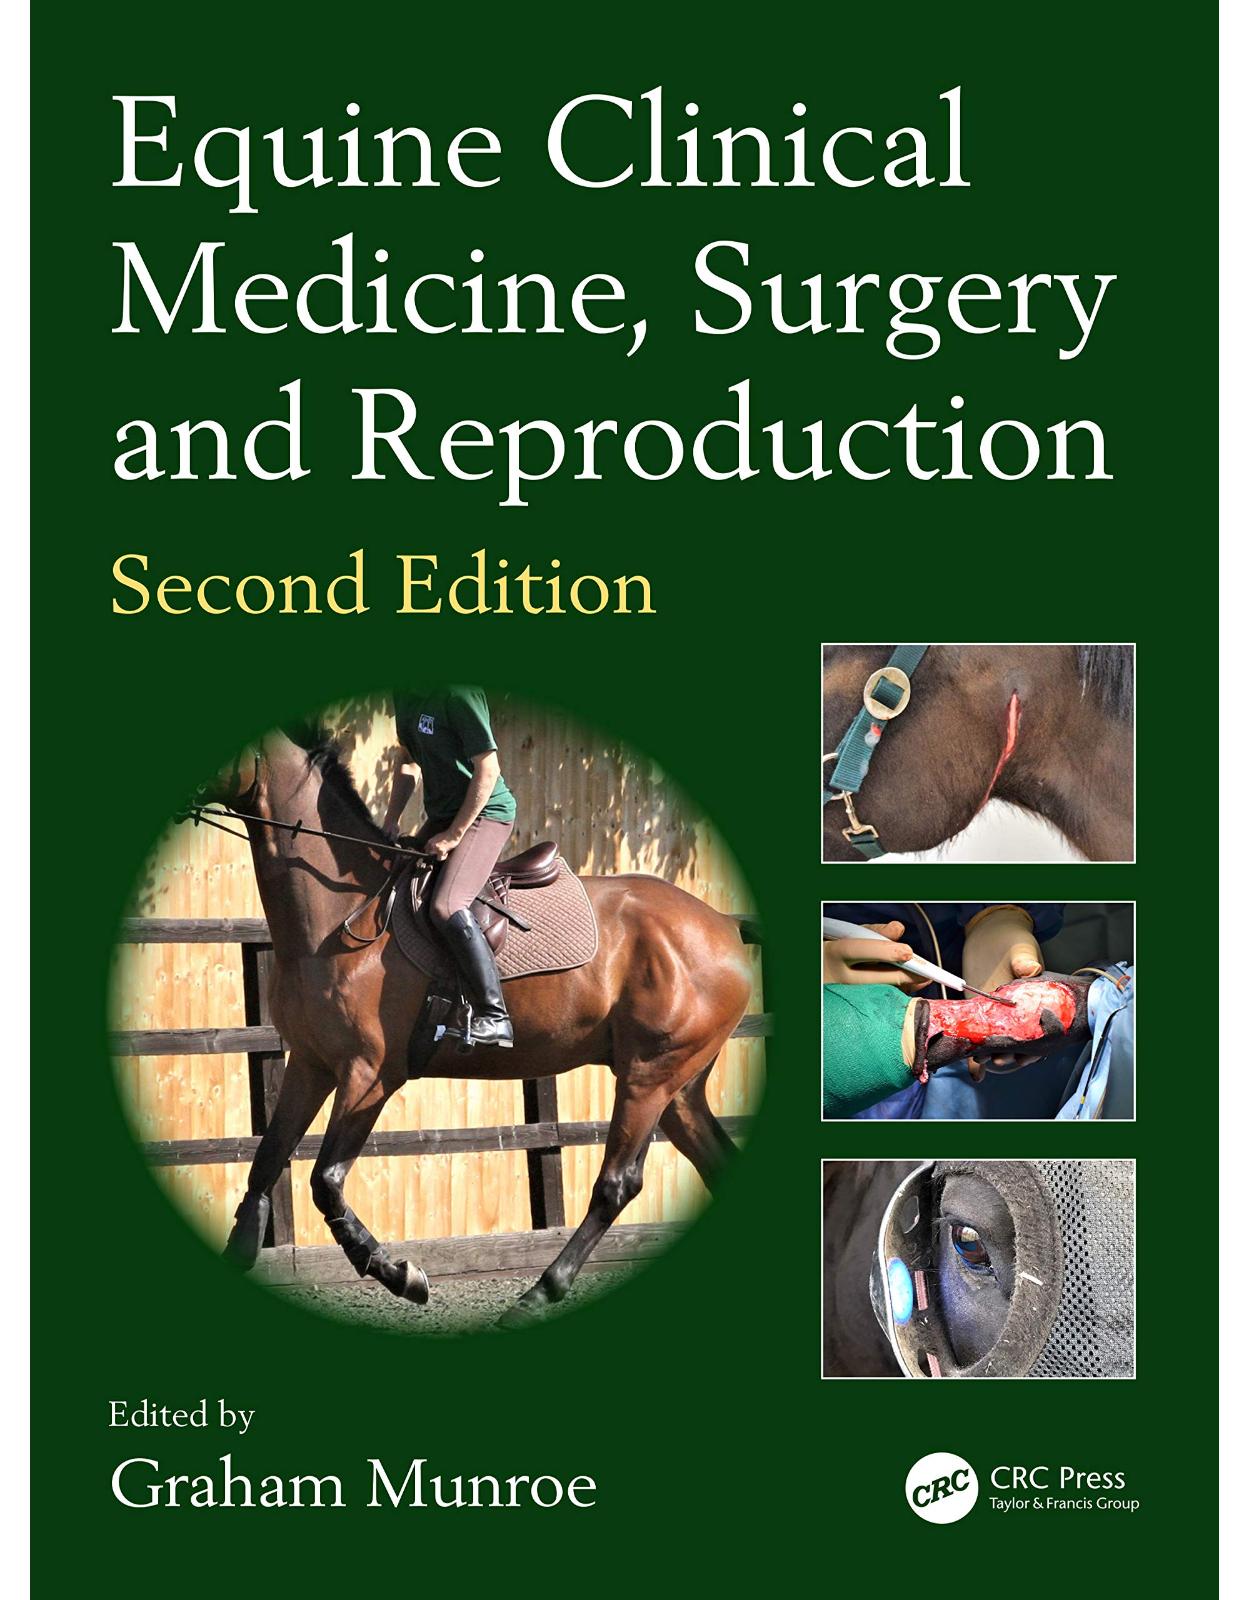 Equine Clinical Medicine, Surgery and Reproduction 